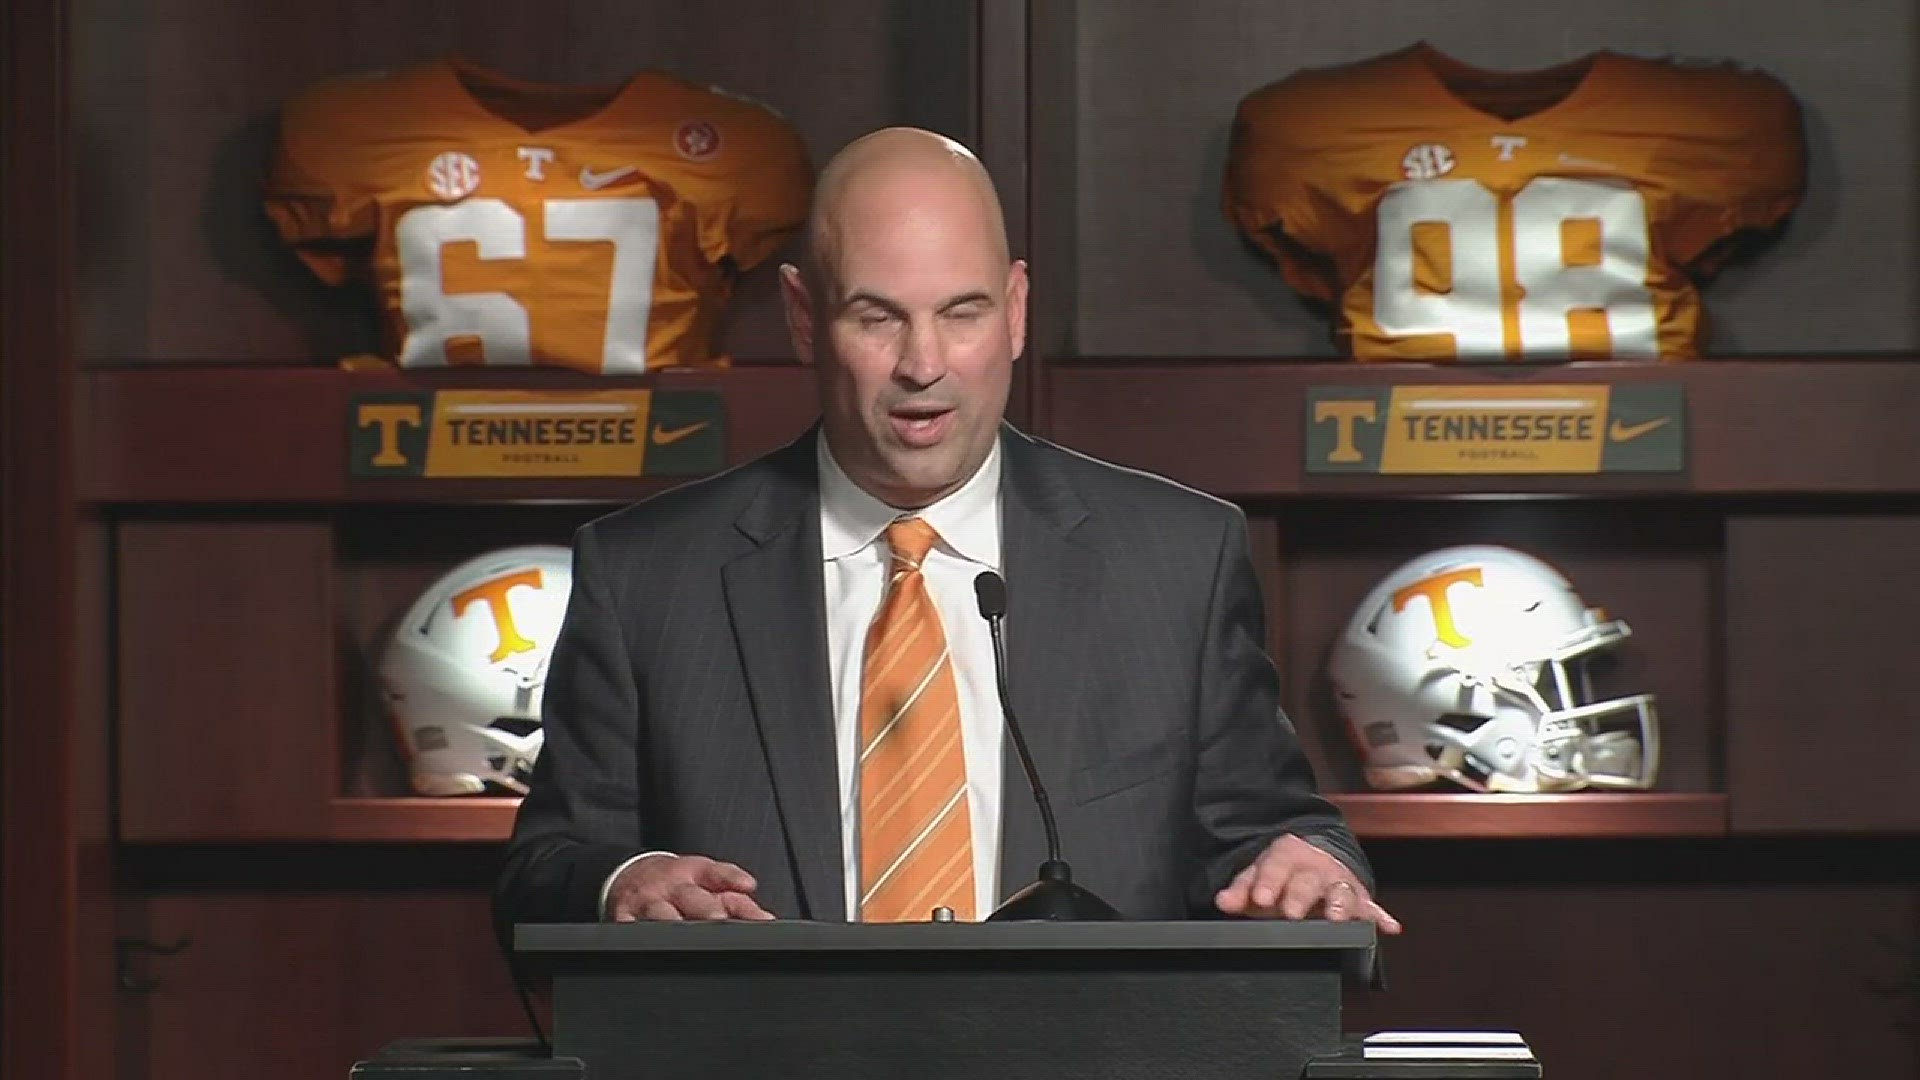 Coach Jeremy Pruitt lays out his vision for the future of Tennessee football at his introductory news conference.